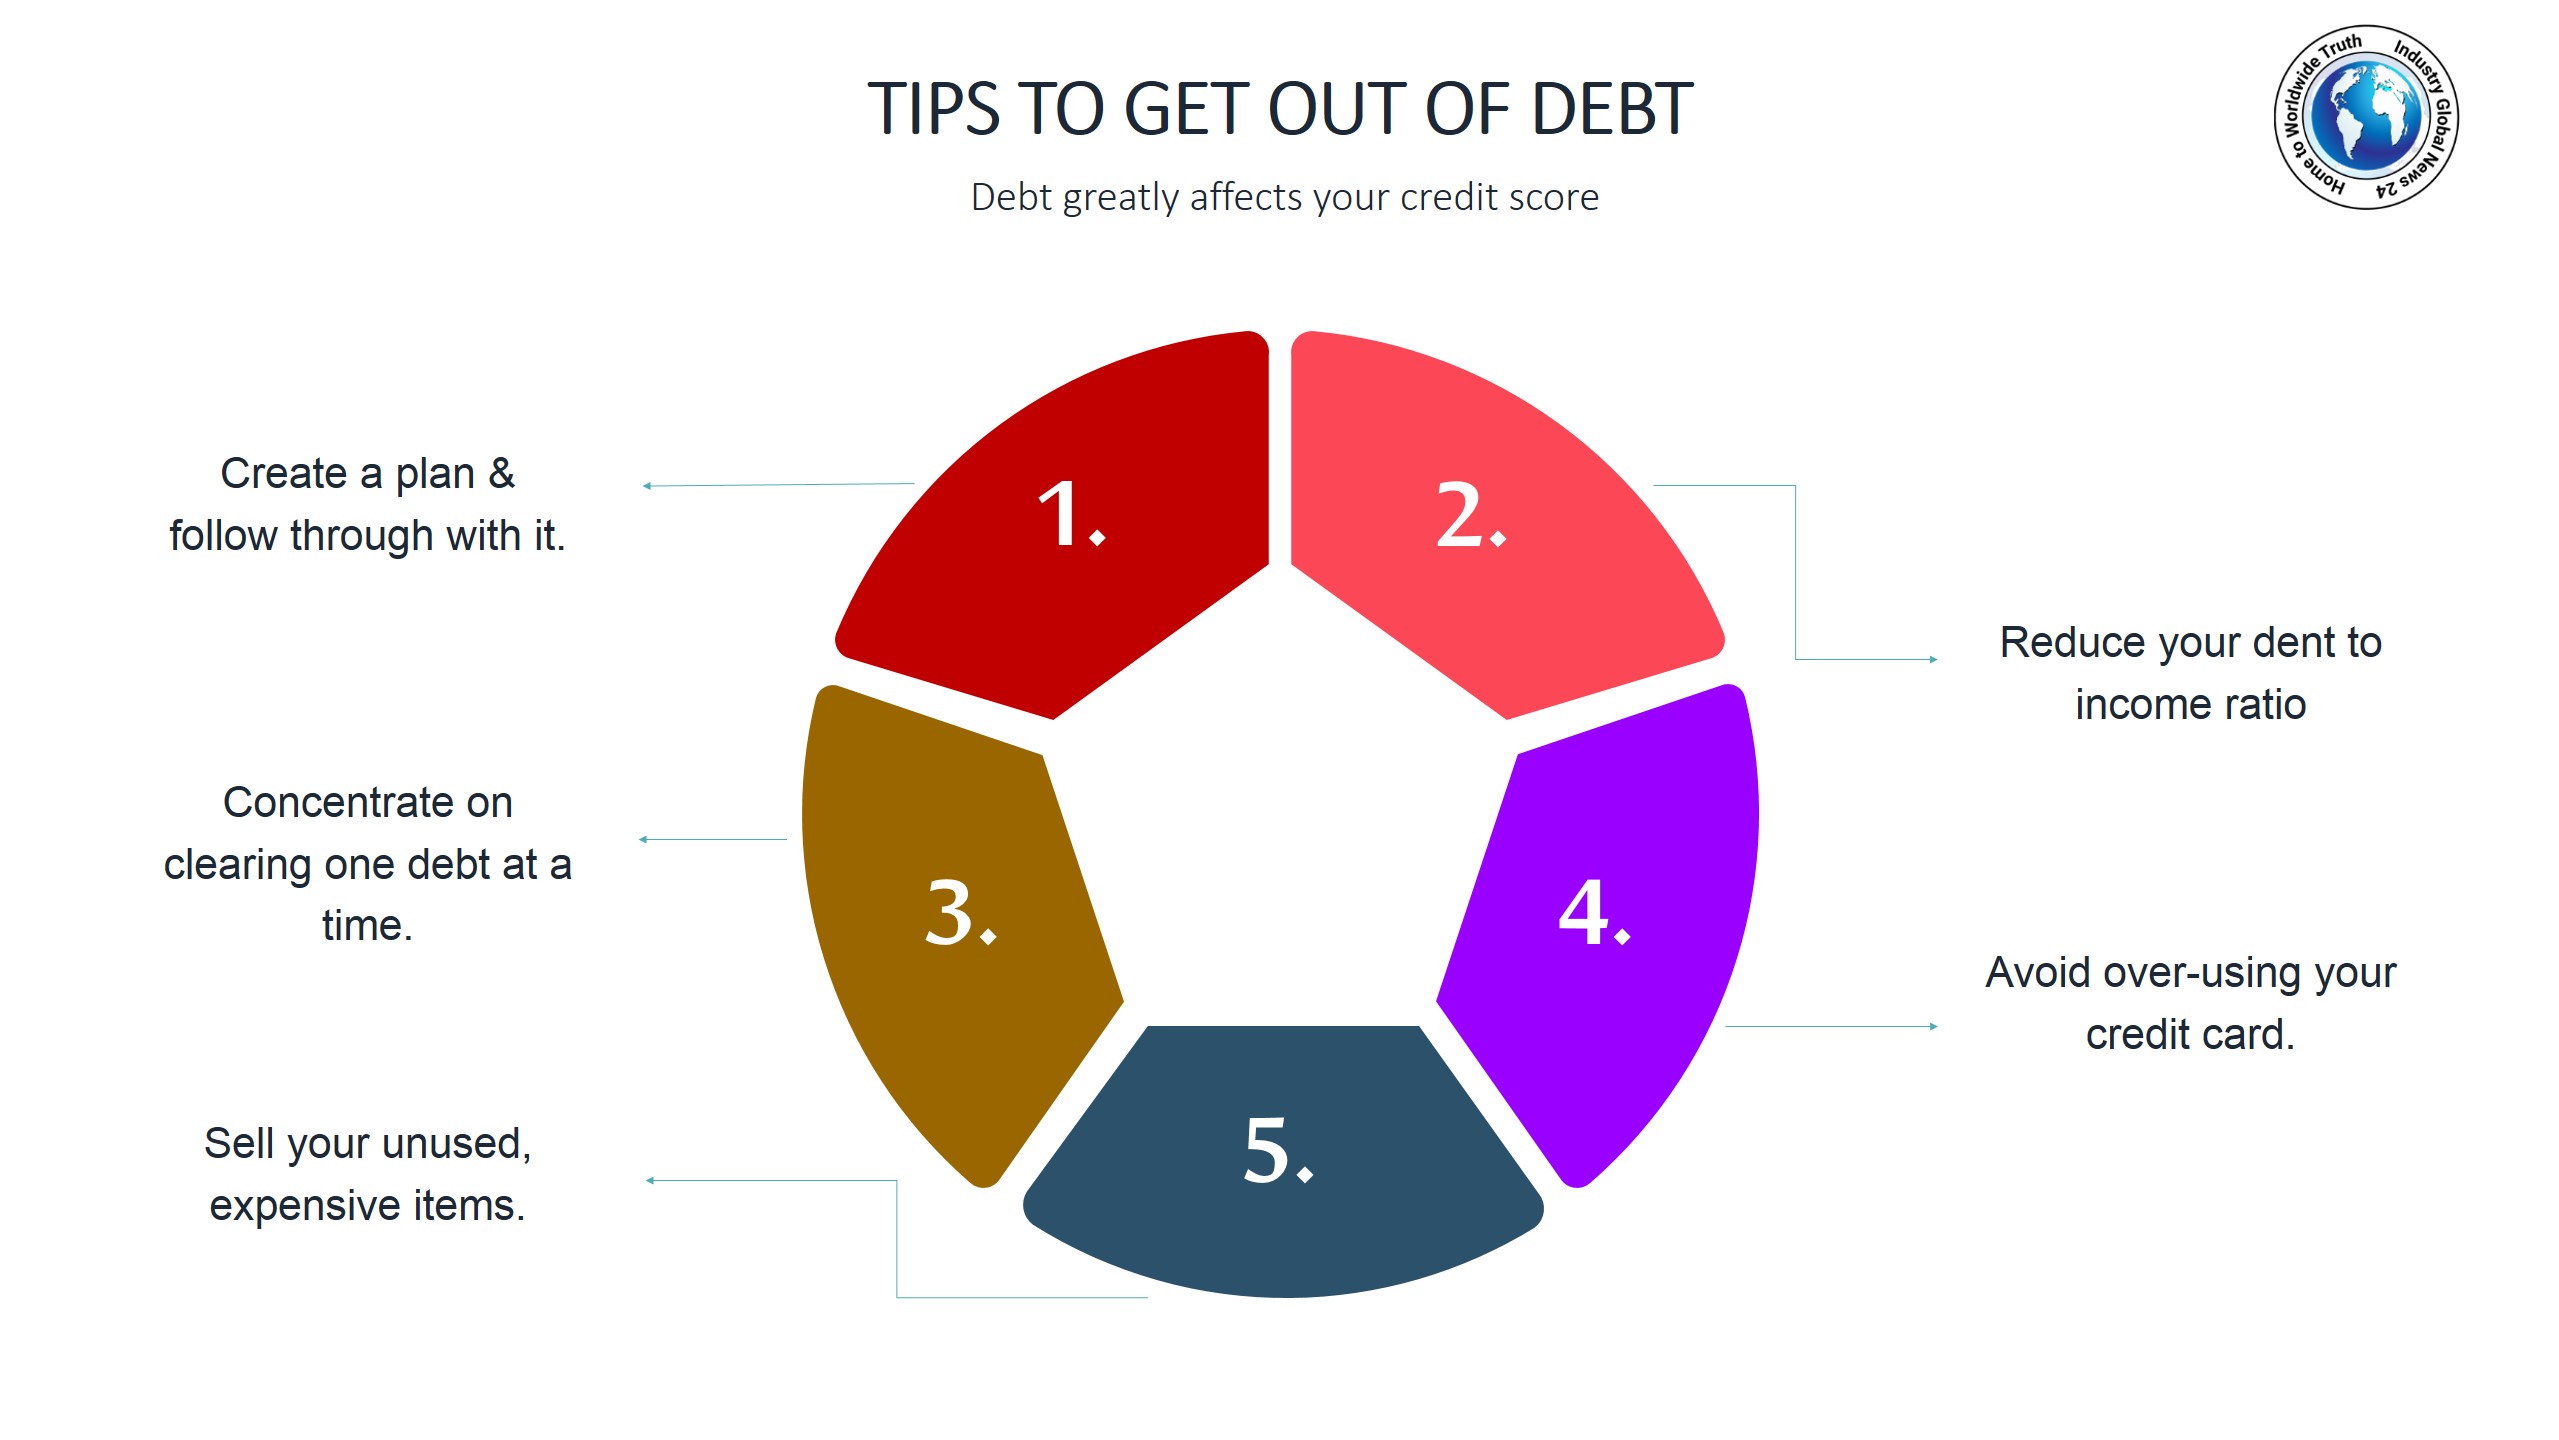 Tips to get out of debt